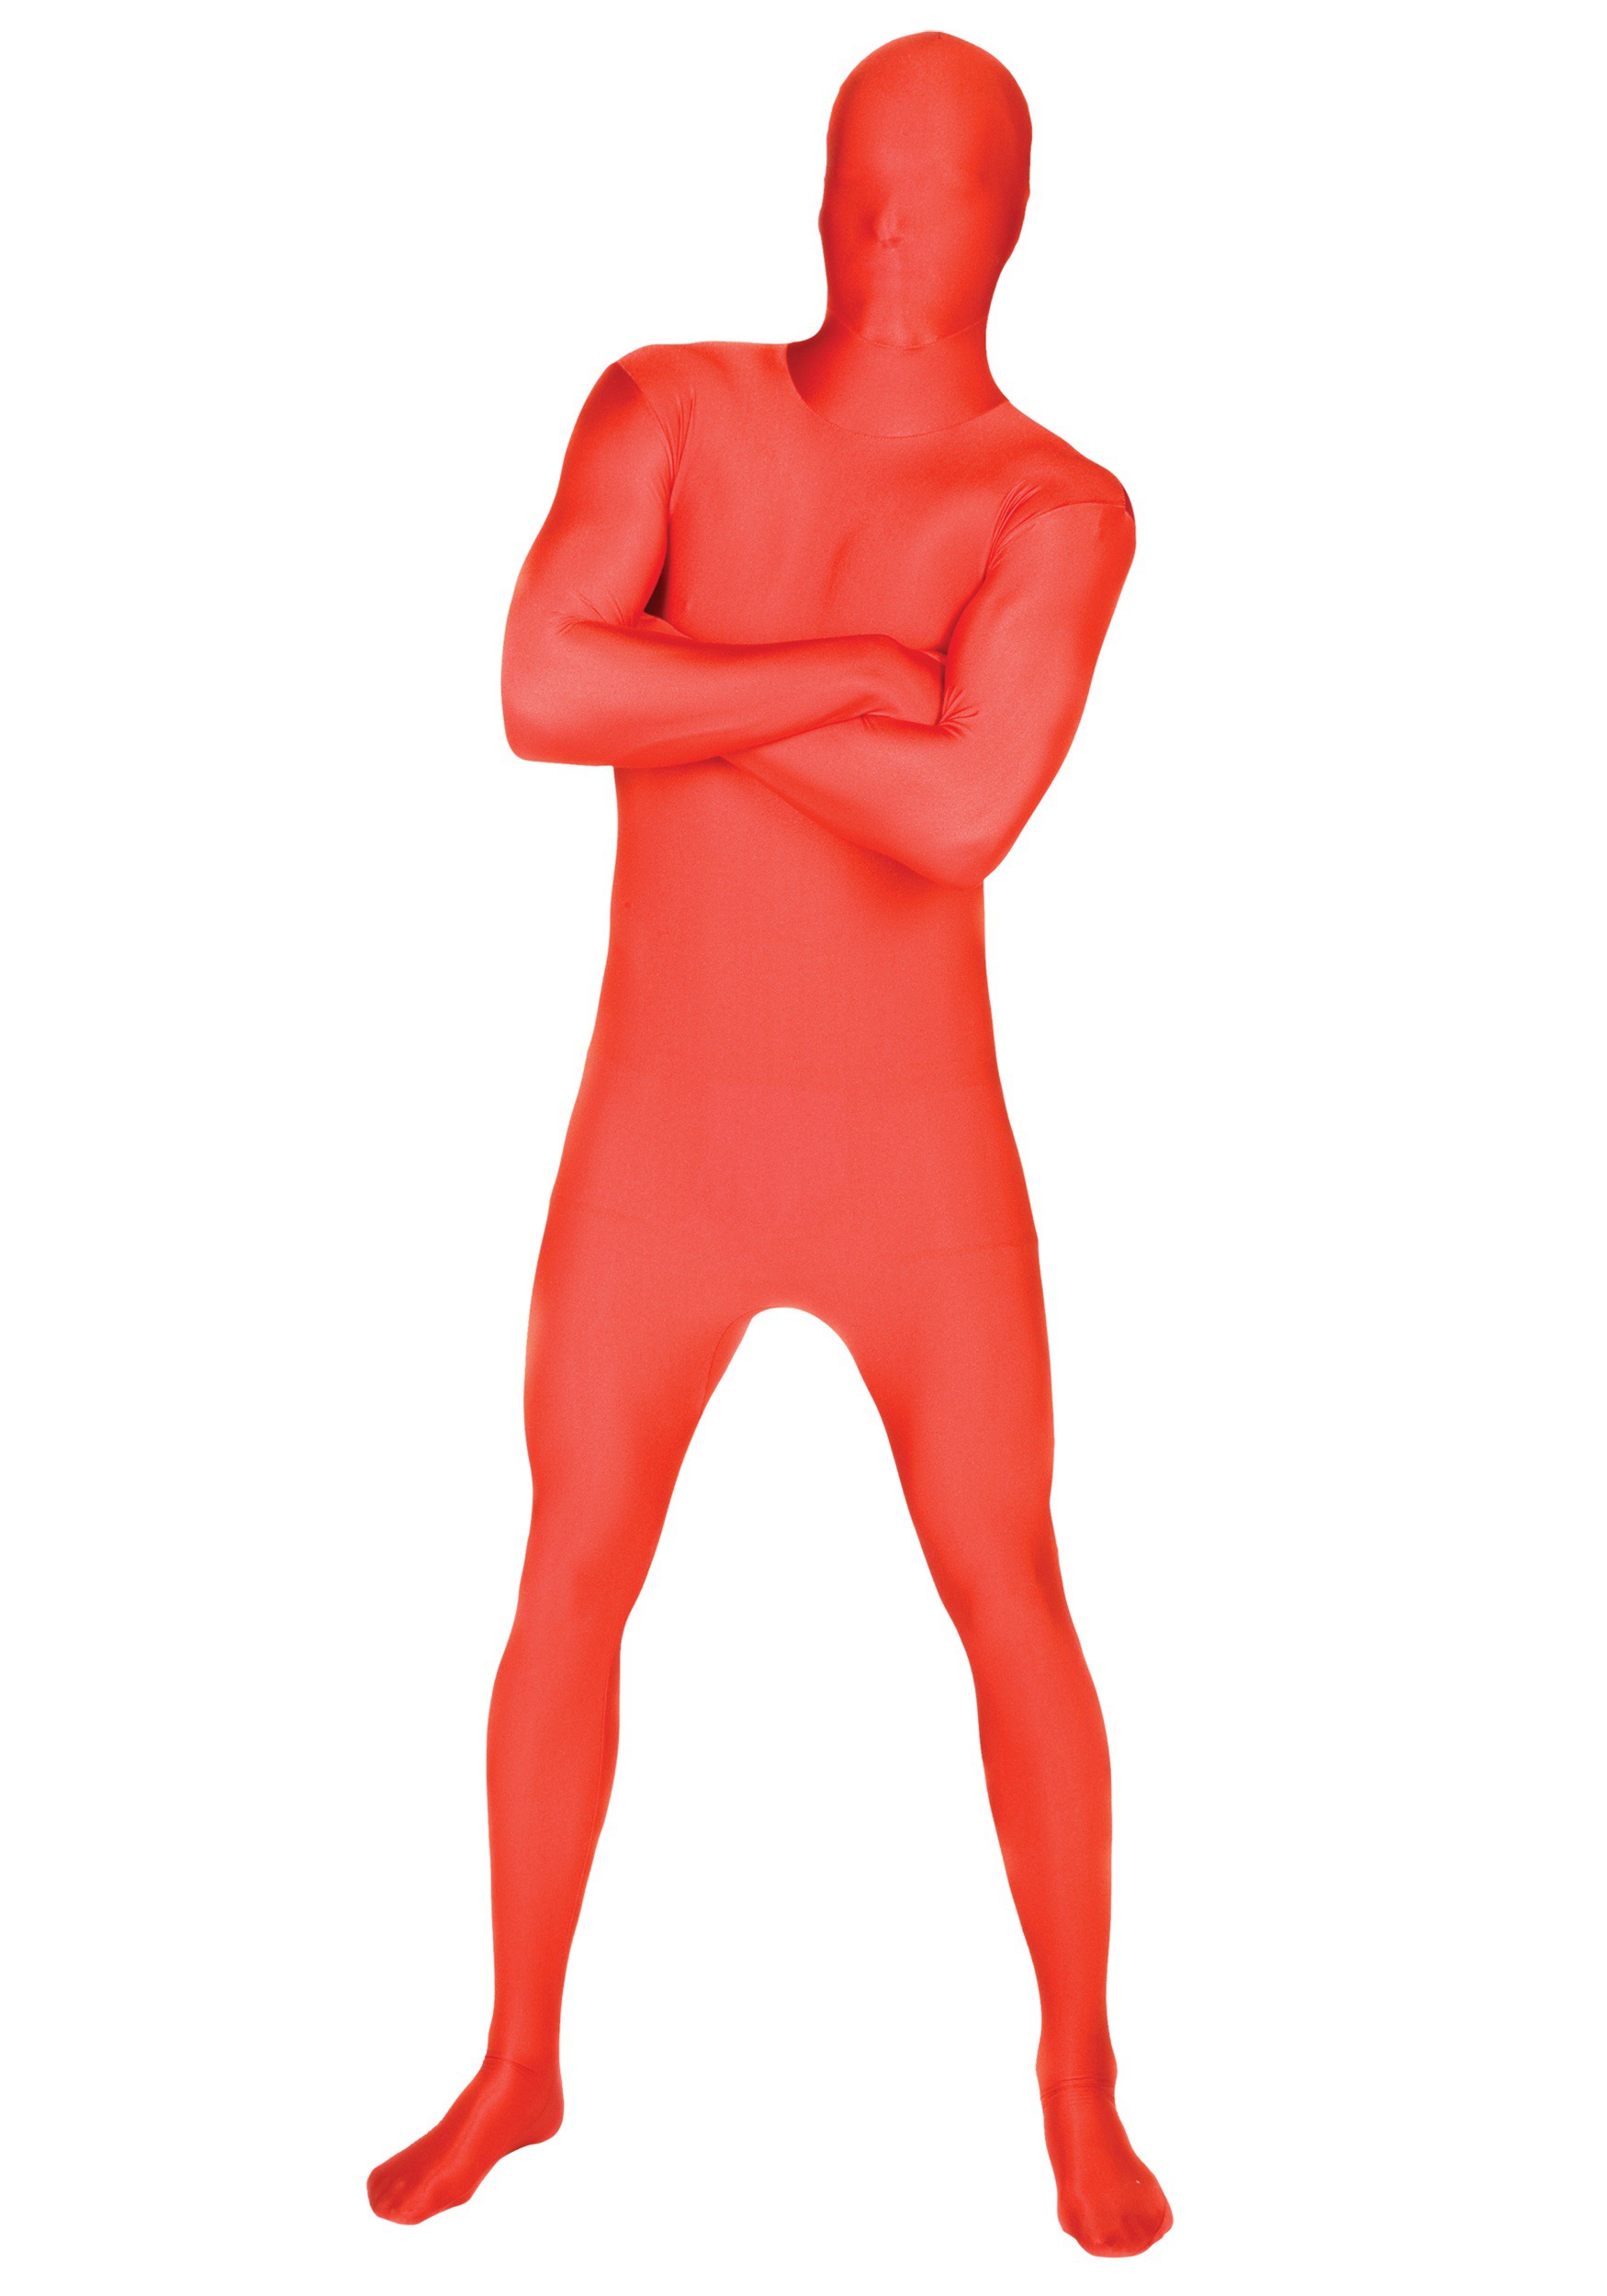 M-Suit Adult Costume Second Skin Bodysuit from the Makers of Morphsuits 